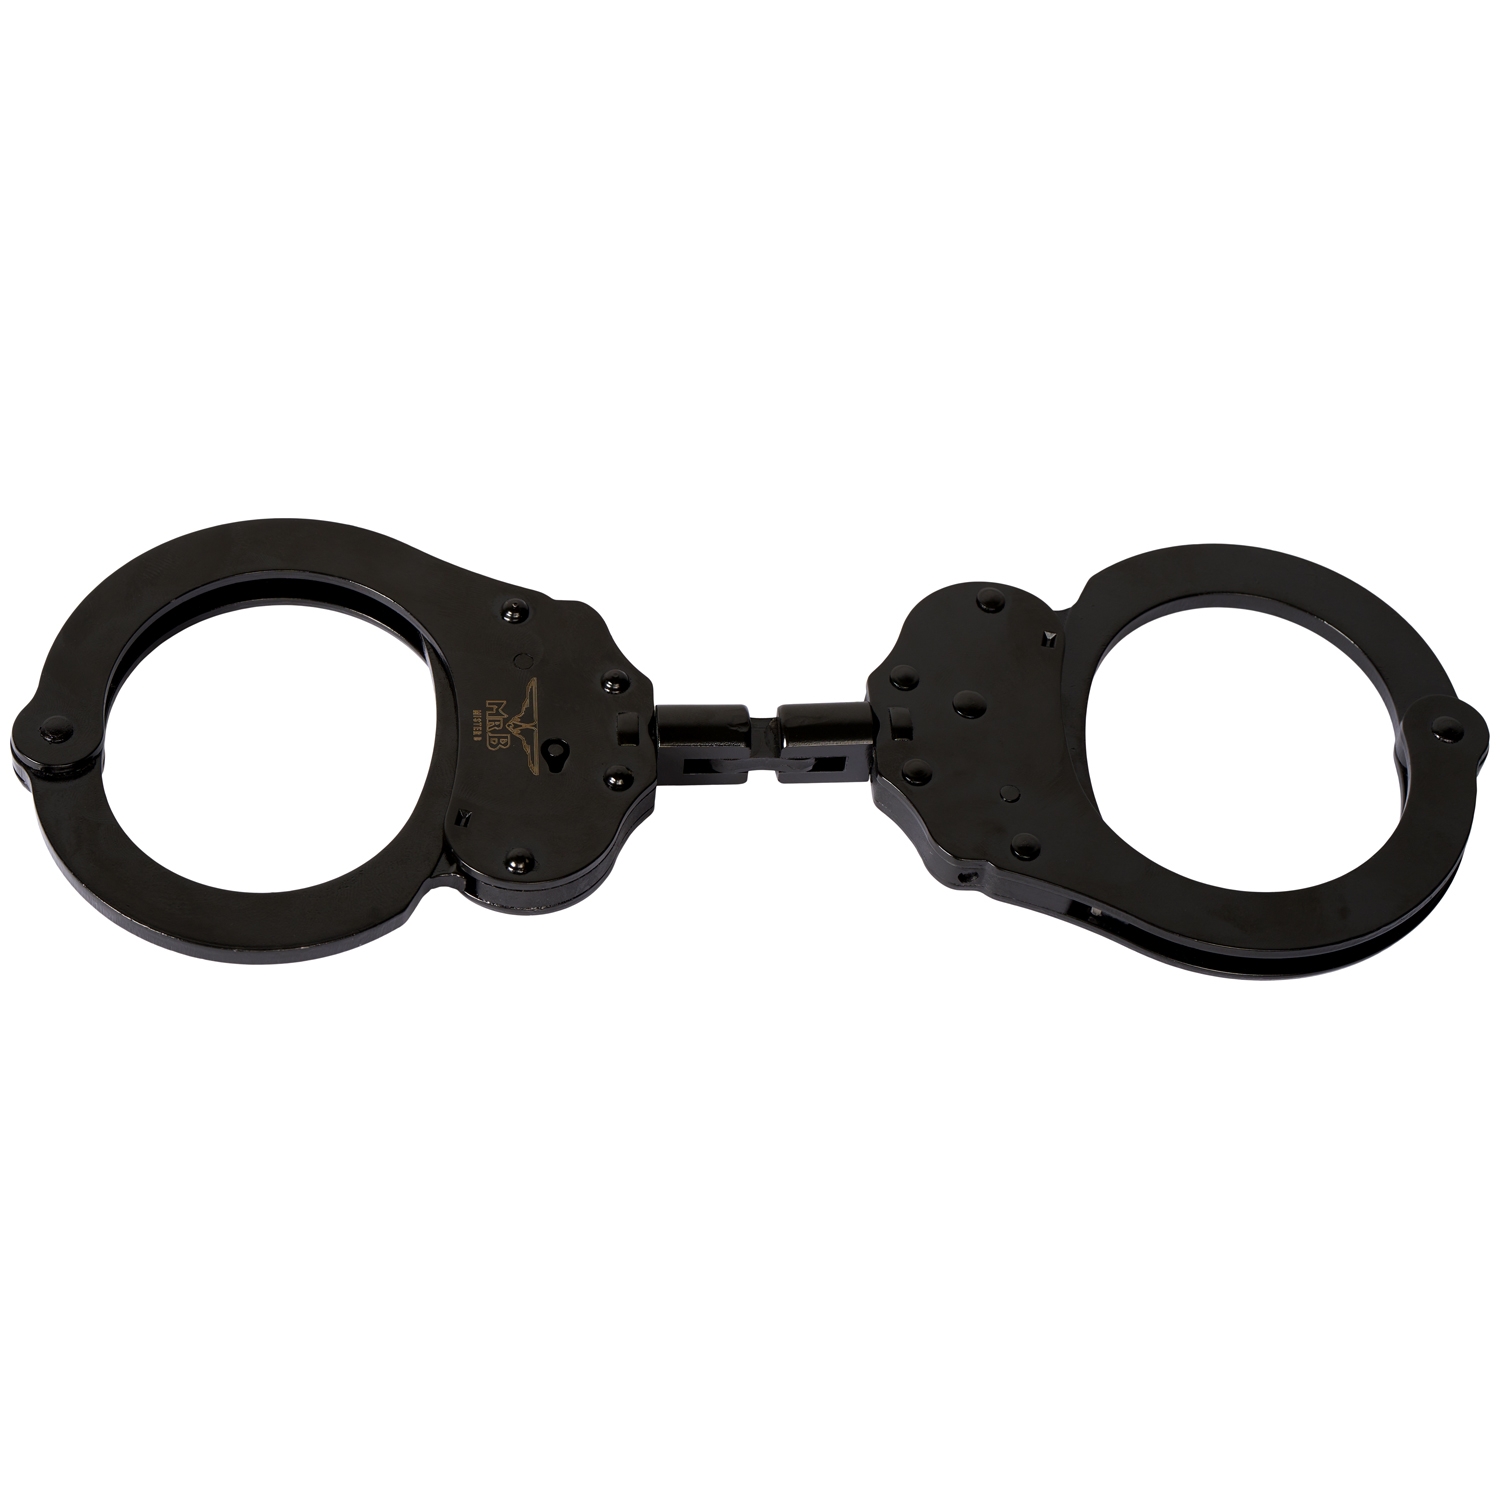 Mister B Cuff Double Lock with Hoop Black - Black